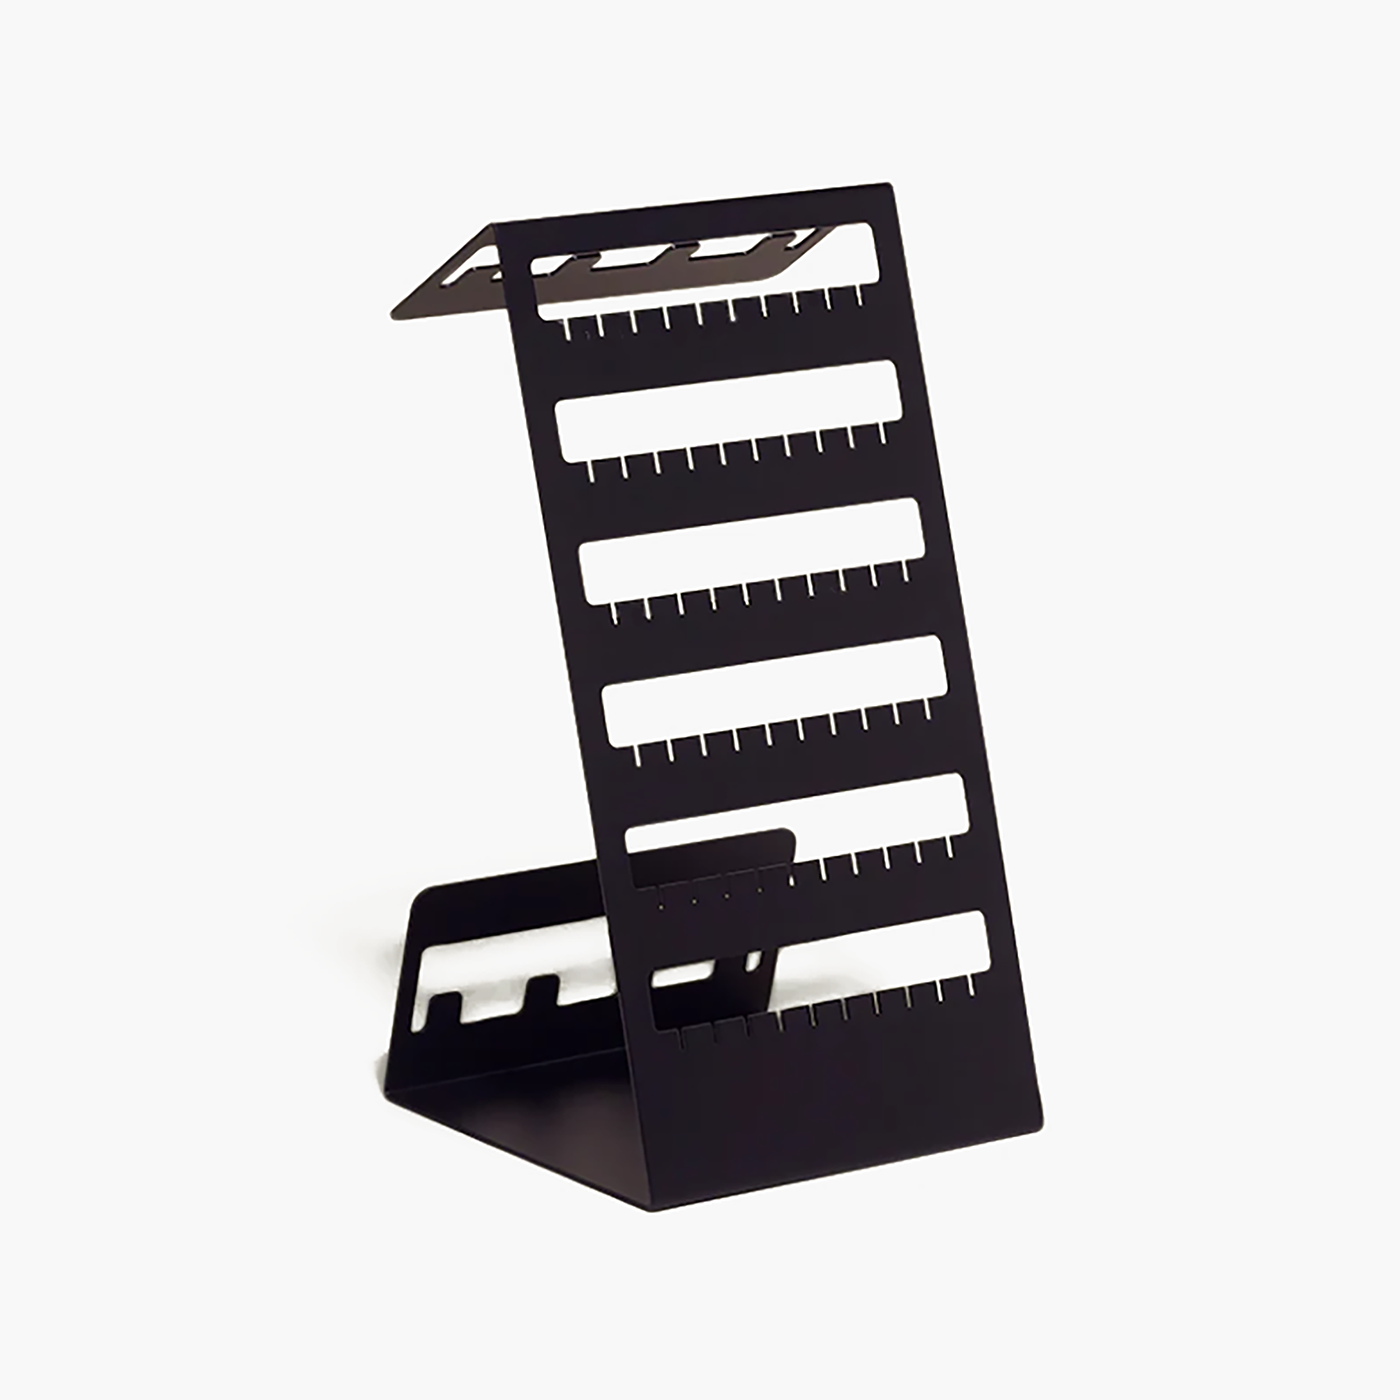 Versatile tabletop jewelry organizer in black featuring compartments for earrings, hooks for necklaces, and slots for rings. 